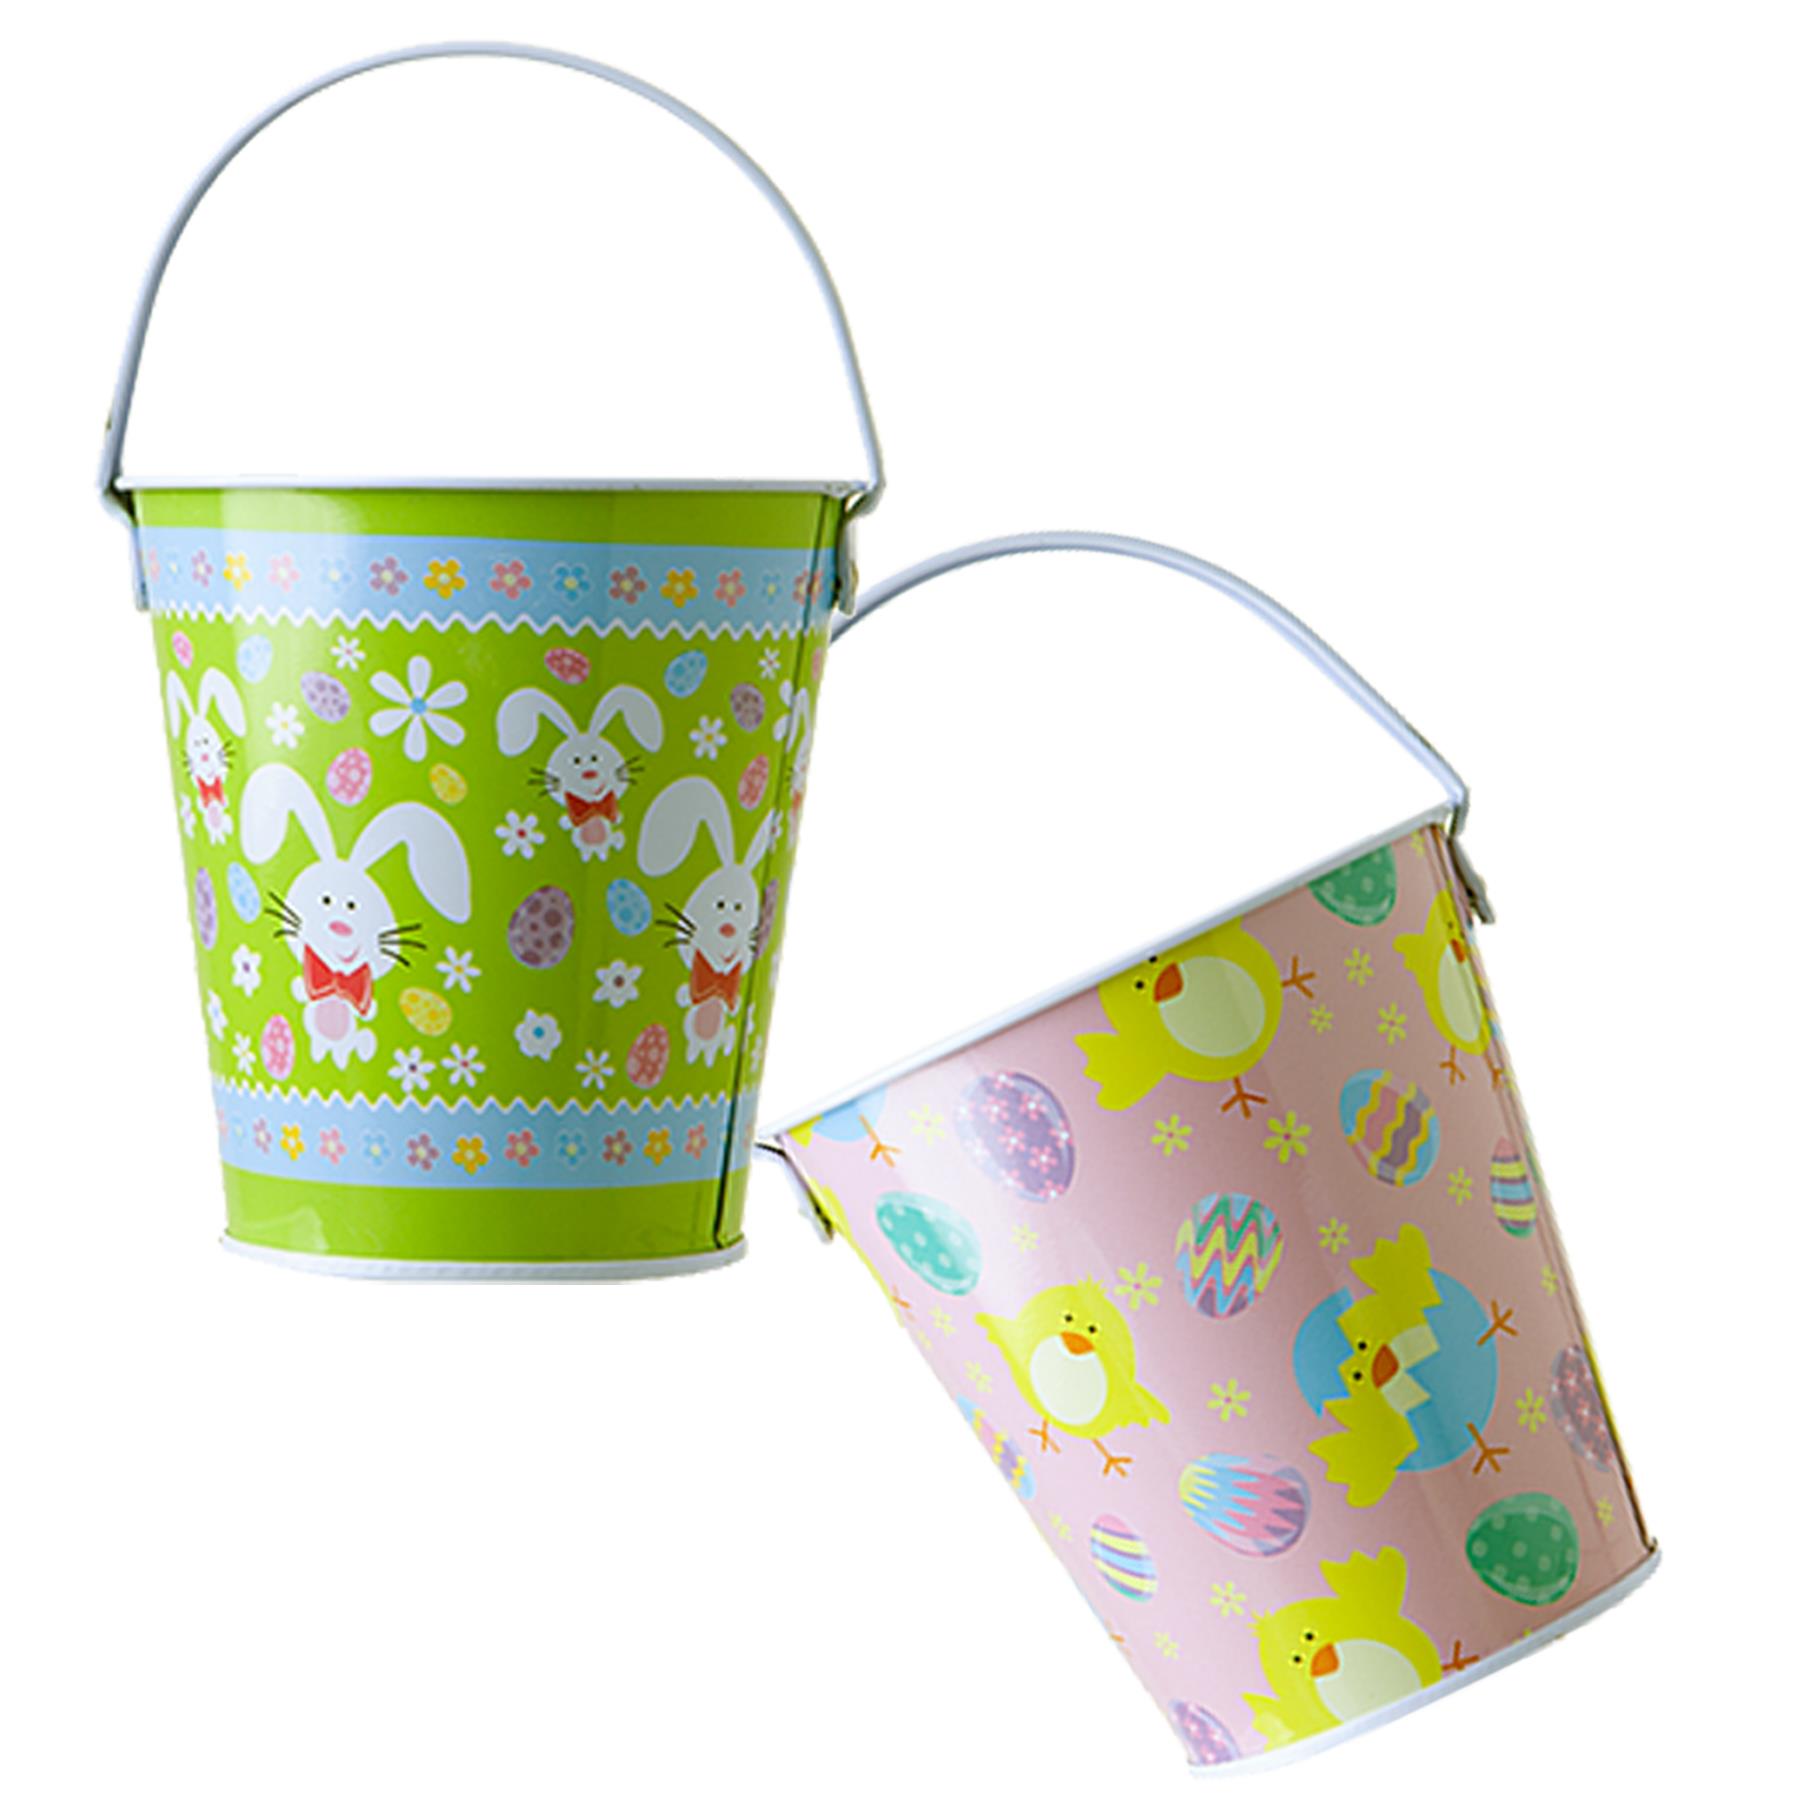 Easter Baskets, Buckets, Accessories - Set of 2 Mini Metal Buckets Bunny / Chick